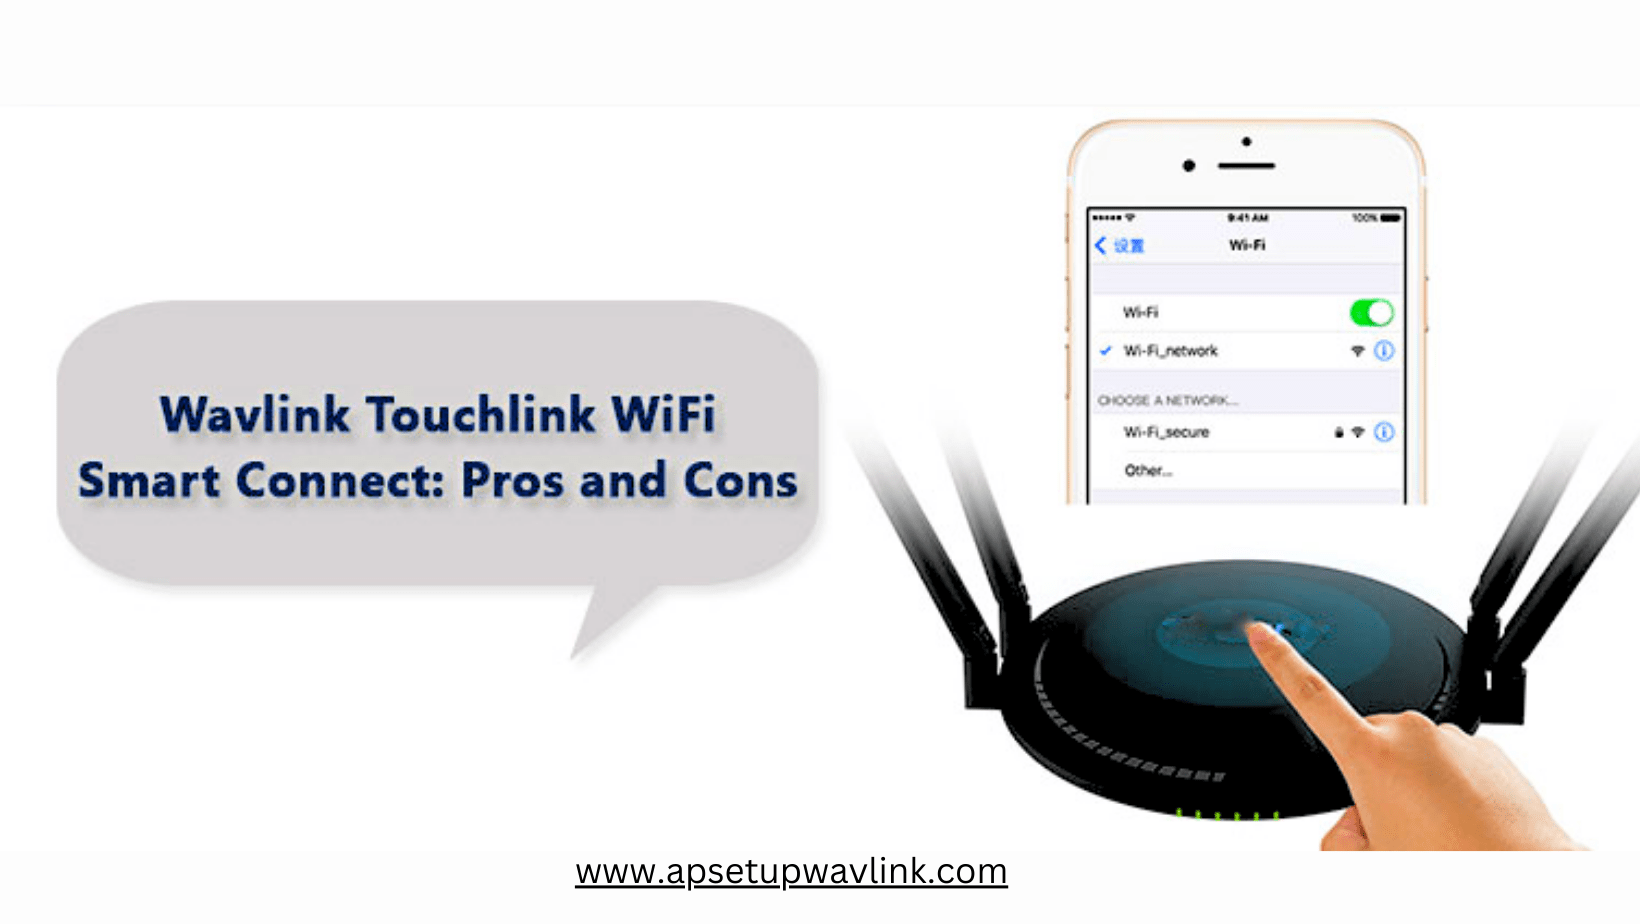 Wavlink Touchlink WiFi Smart Connect